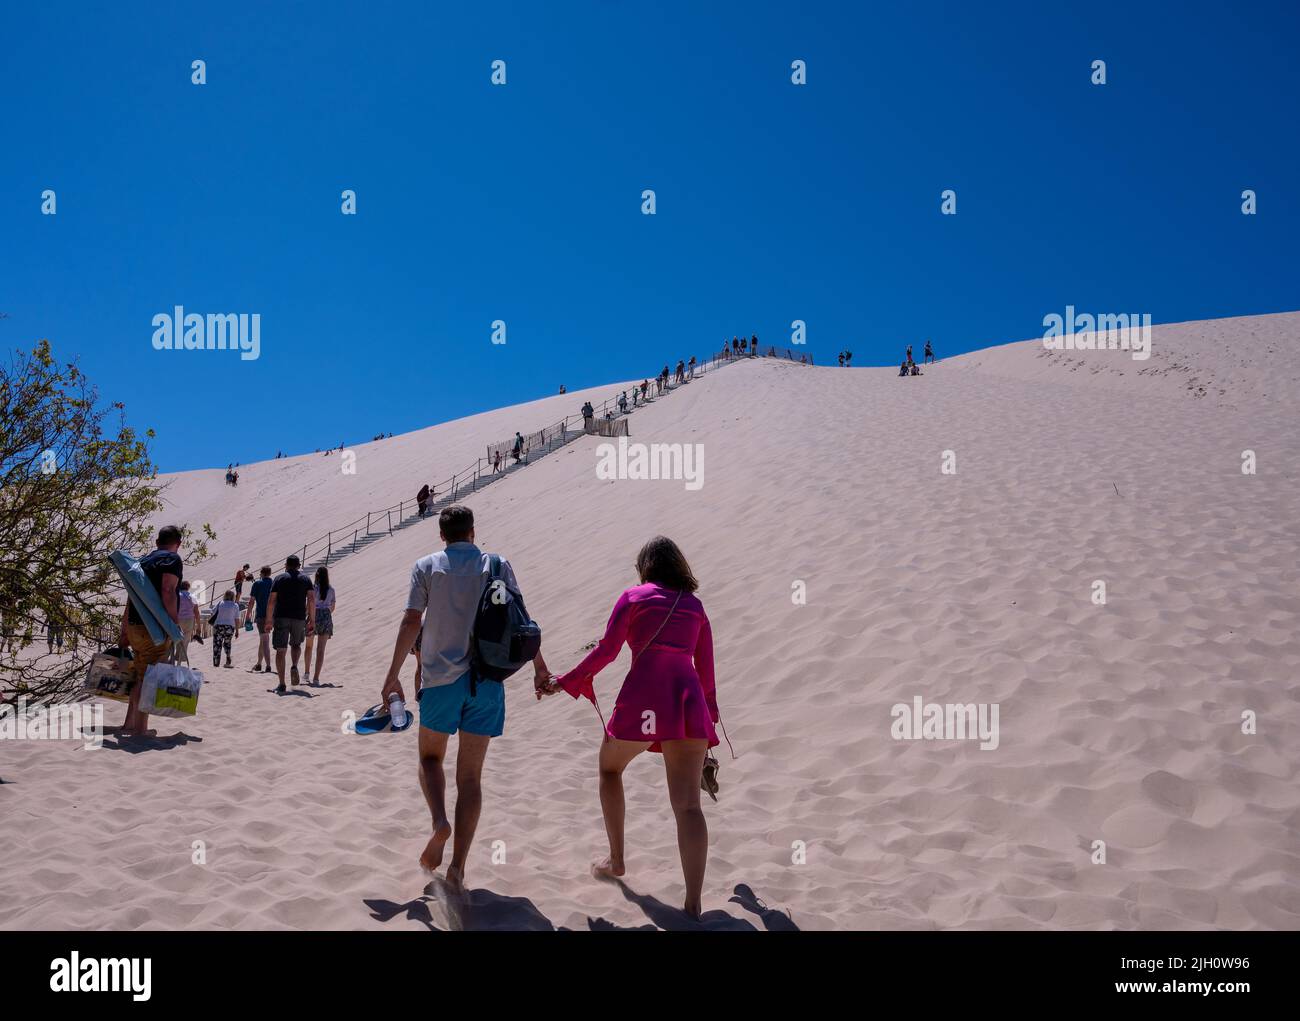 The Dune of Pilat also called Grande Dune du Pilat, the tallest sand dunes in Europe overlooking Arcachon Bay in France Stock Photo